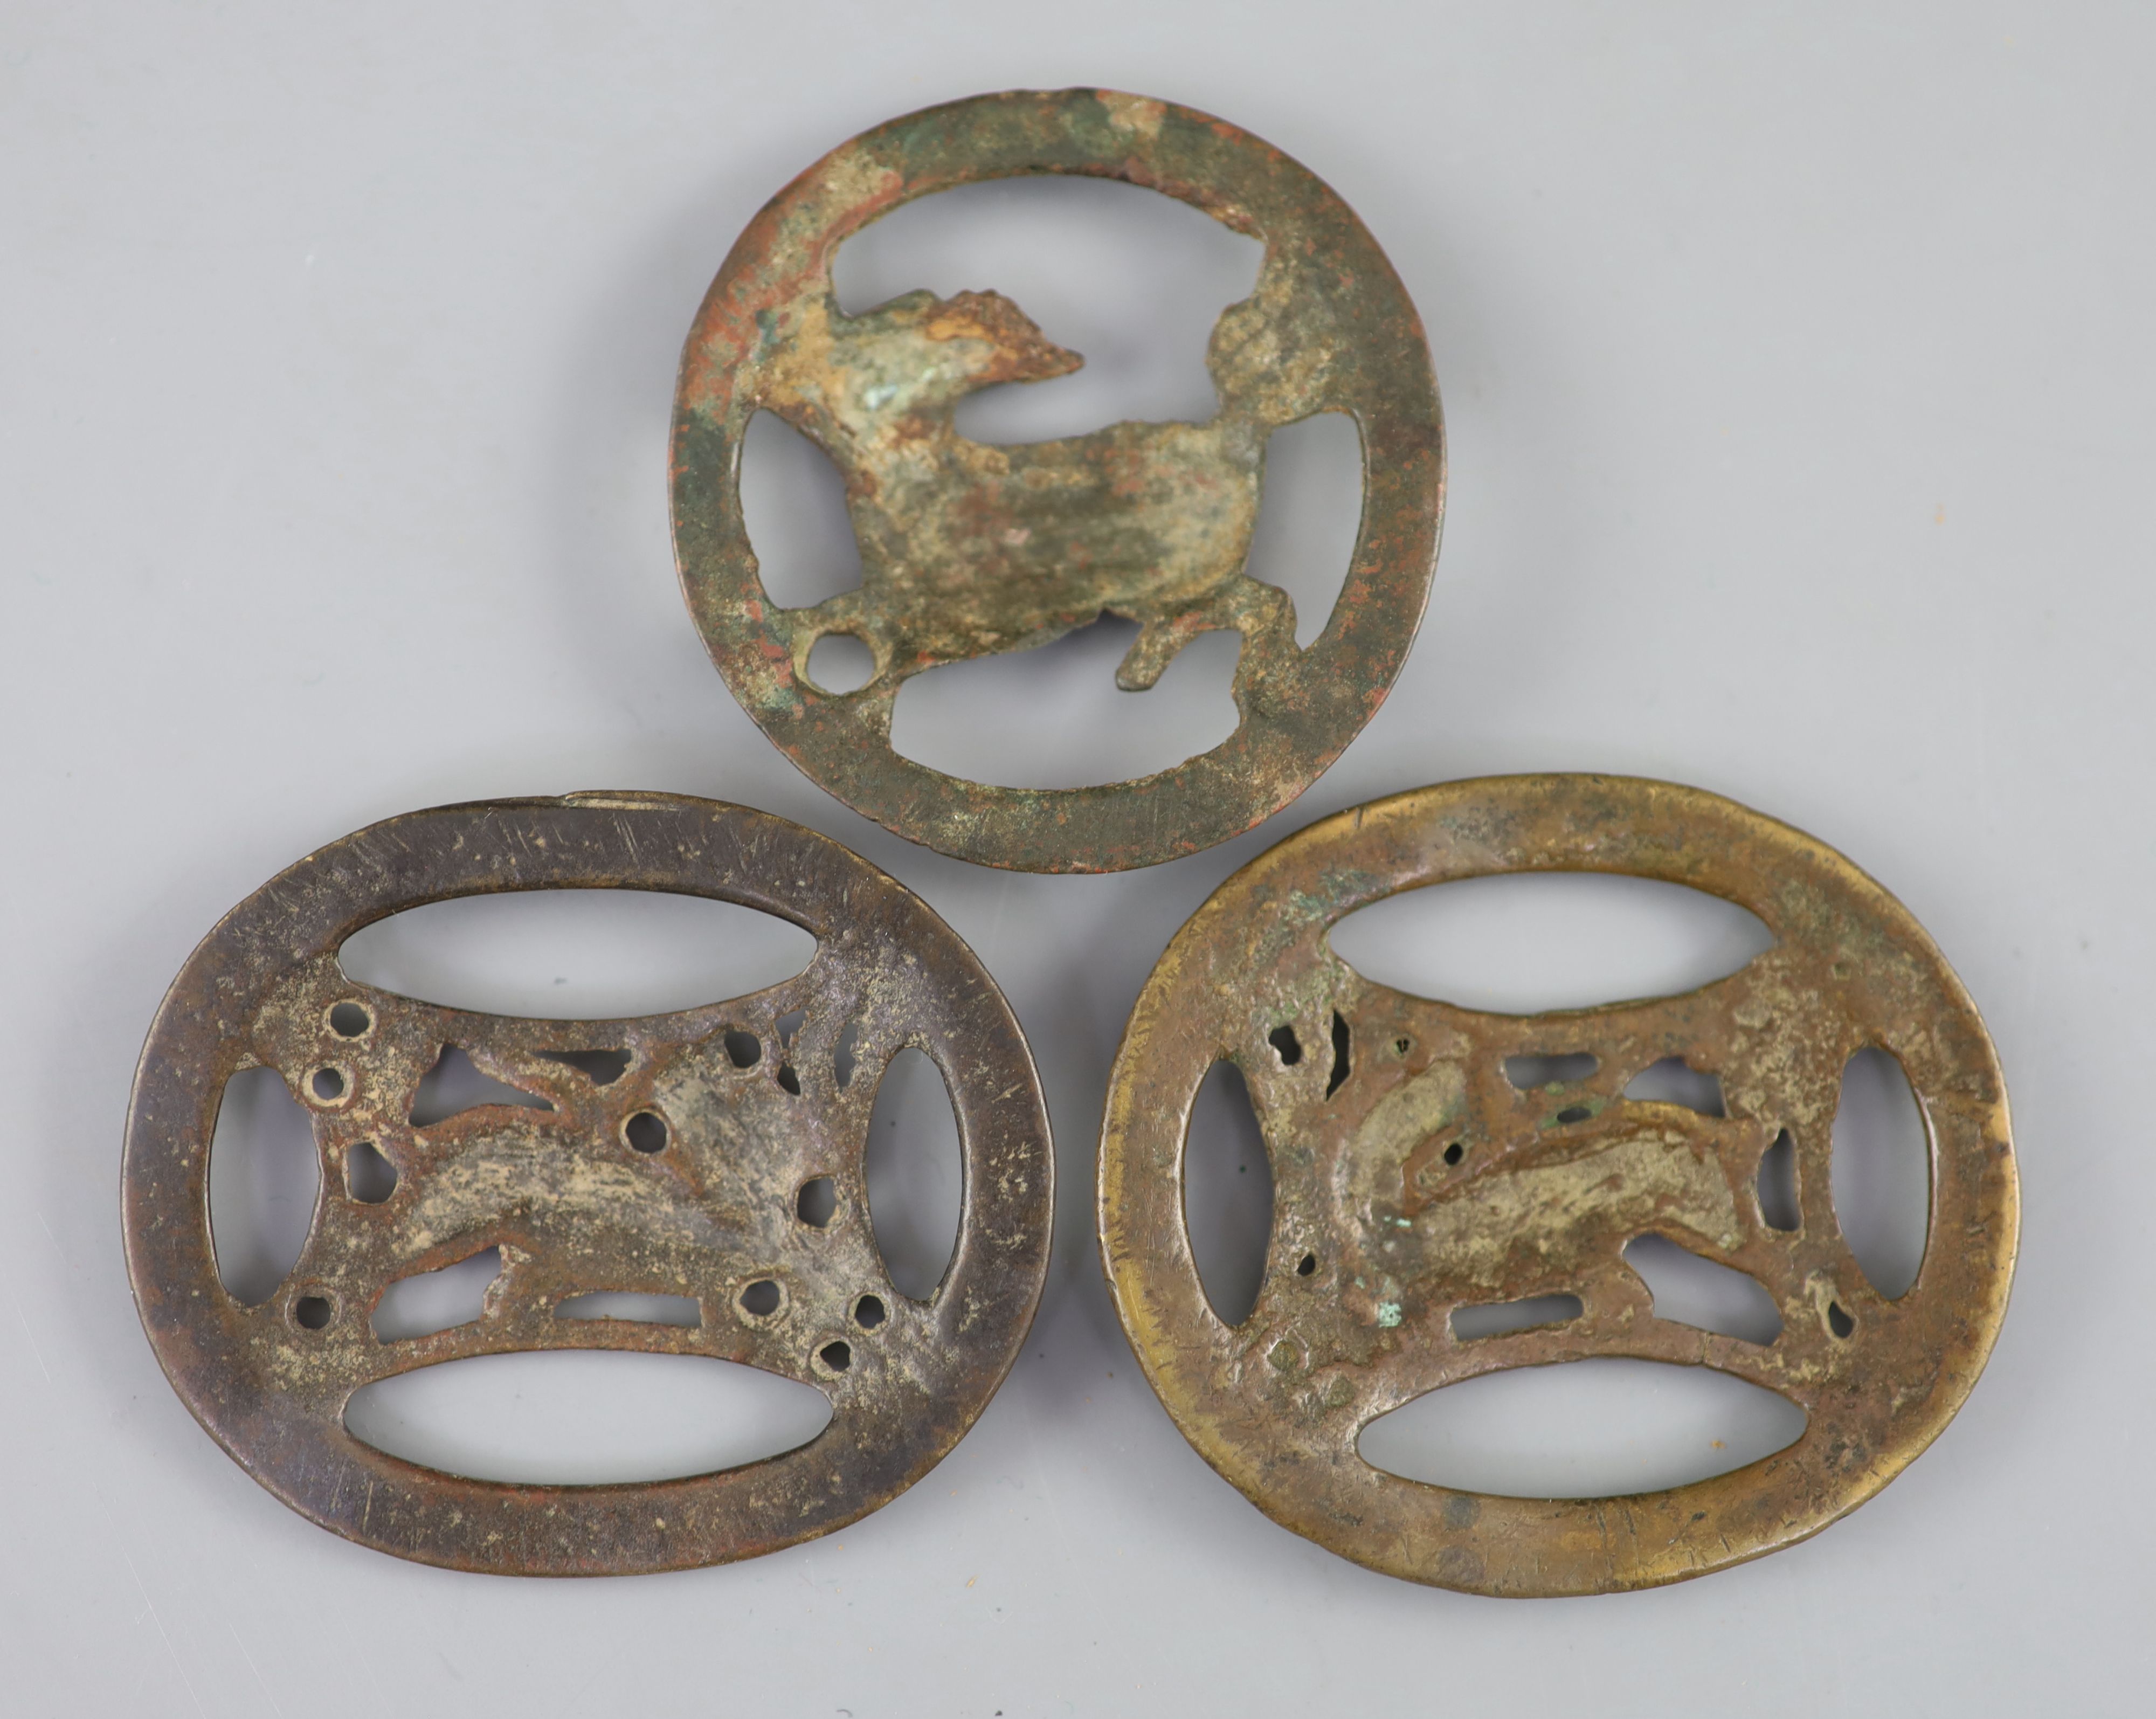 China, 3 large bronze openwork amulets, probably Song-Ming dynasty,